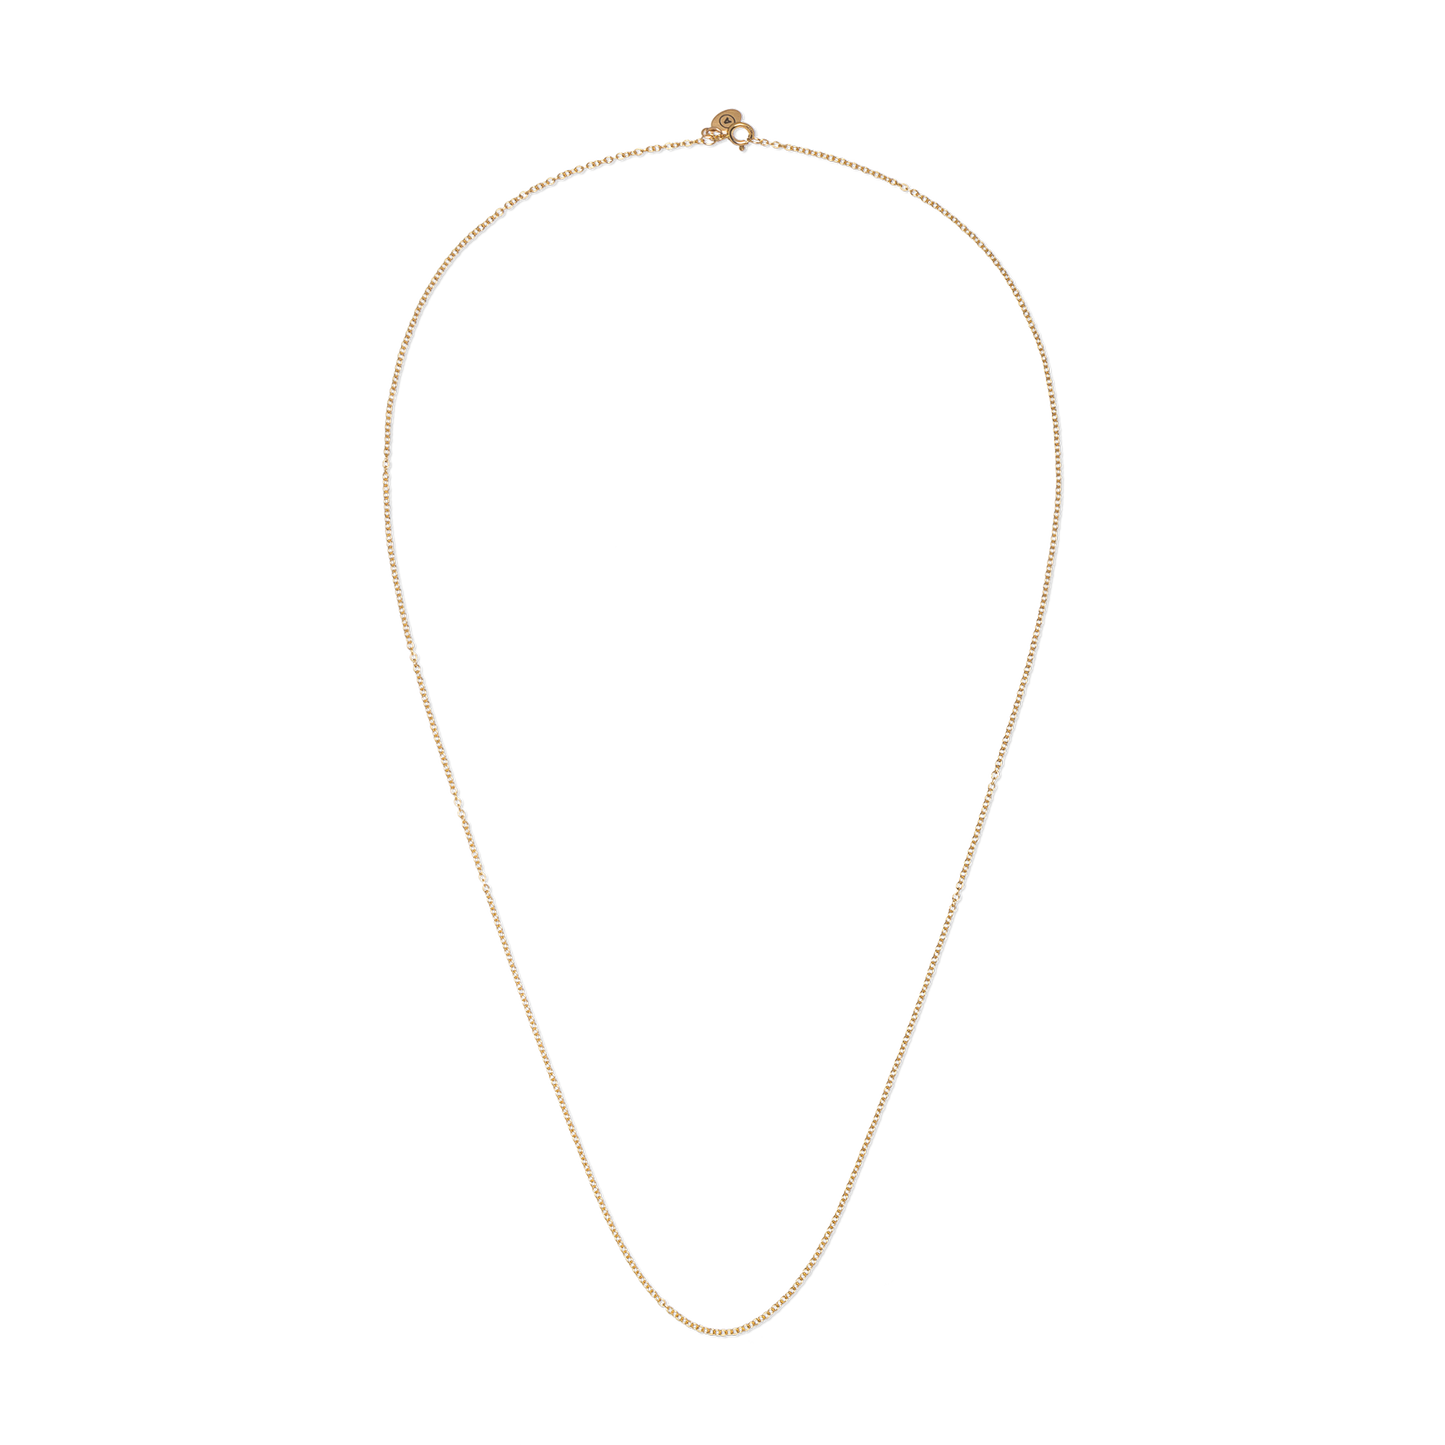 NECKLACE CHAIN 14k gold filled